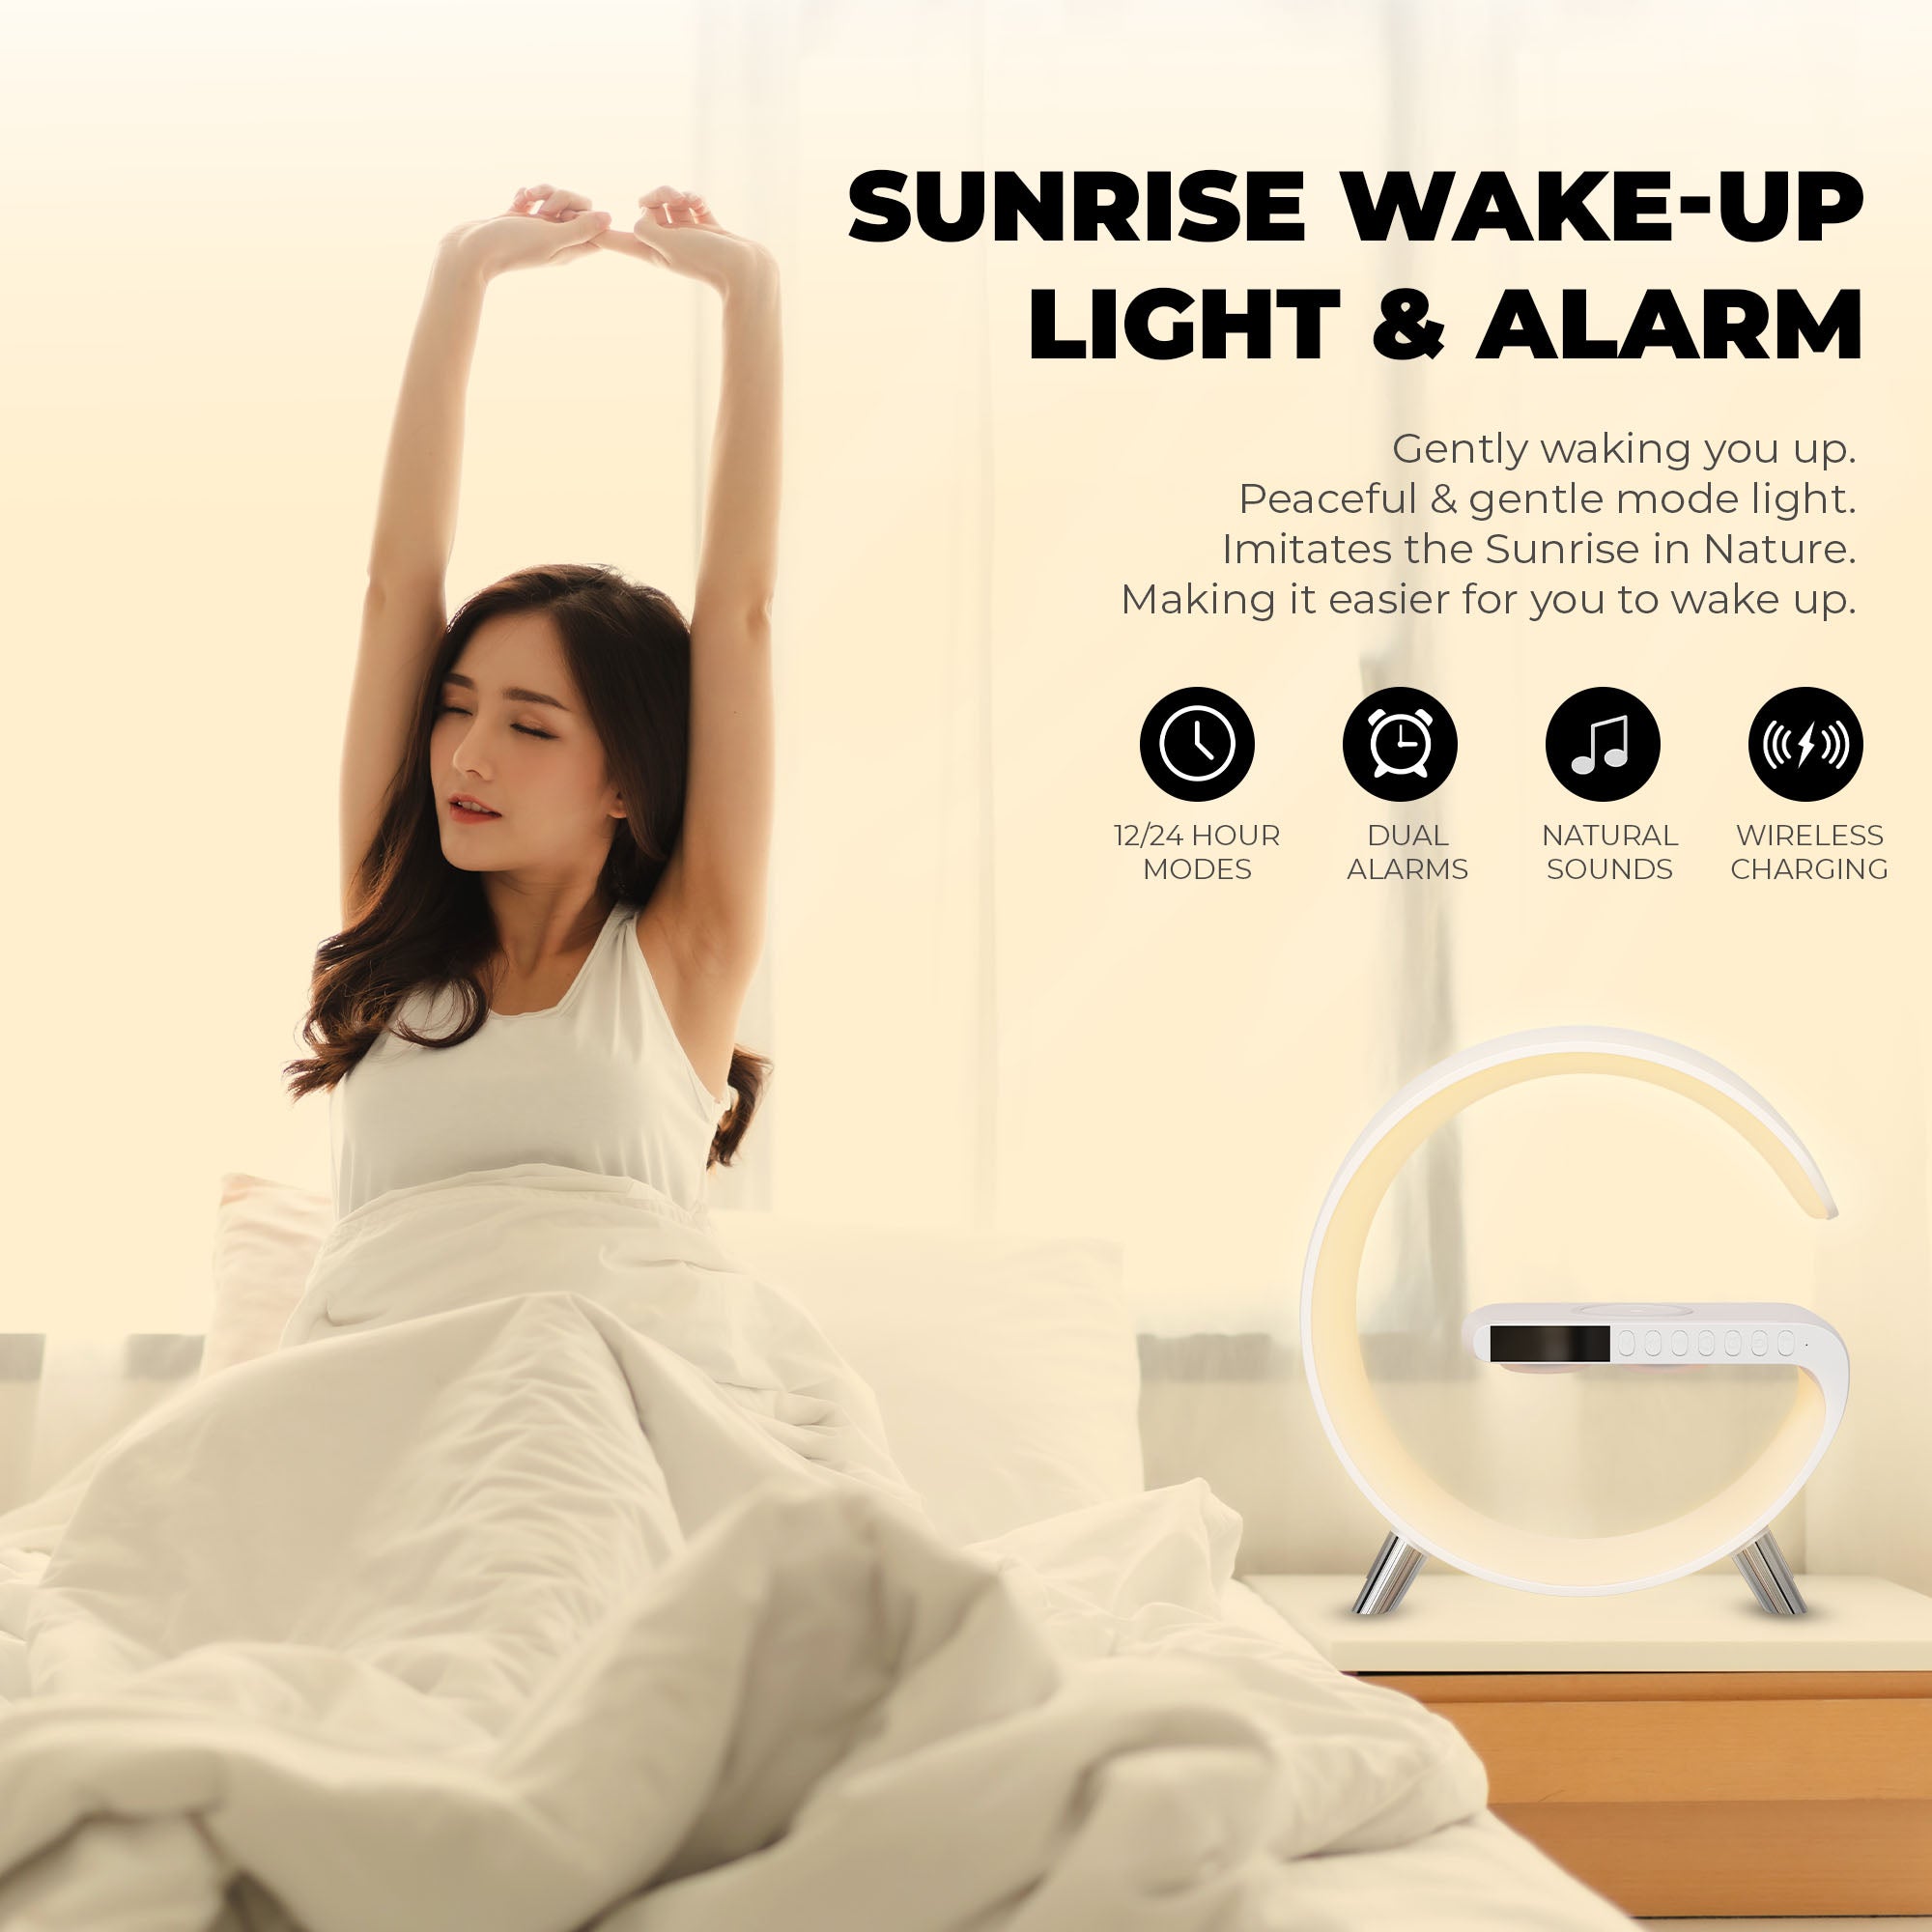 JCBL ACCESSORIES Wireless Charger Atmosphere Light Lamp, 4-in-1 Charger with BT, Speaker, Alarm Clock, and App Control Lights for Bedroom, Ambient Light (Original, White, 2023) | SUNRISE WAKE-UP LIGHT & ALARM | Gently waking you up. | Peaceful & gentle mode light. | Imitates the Sunrise in Nature. | Making it easier for you to wake up.| | 12/24 Hour MODES DUAL ALAMS ,NATURAL SOUNDS, WIRELESS CHARGING |